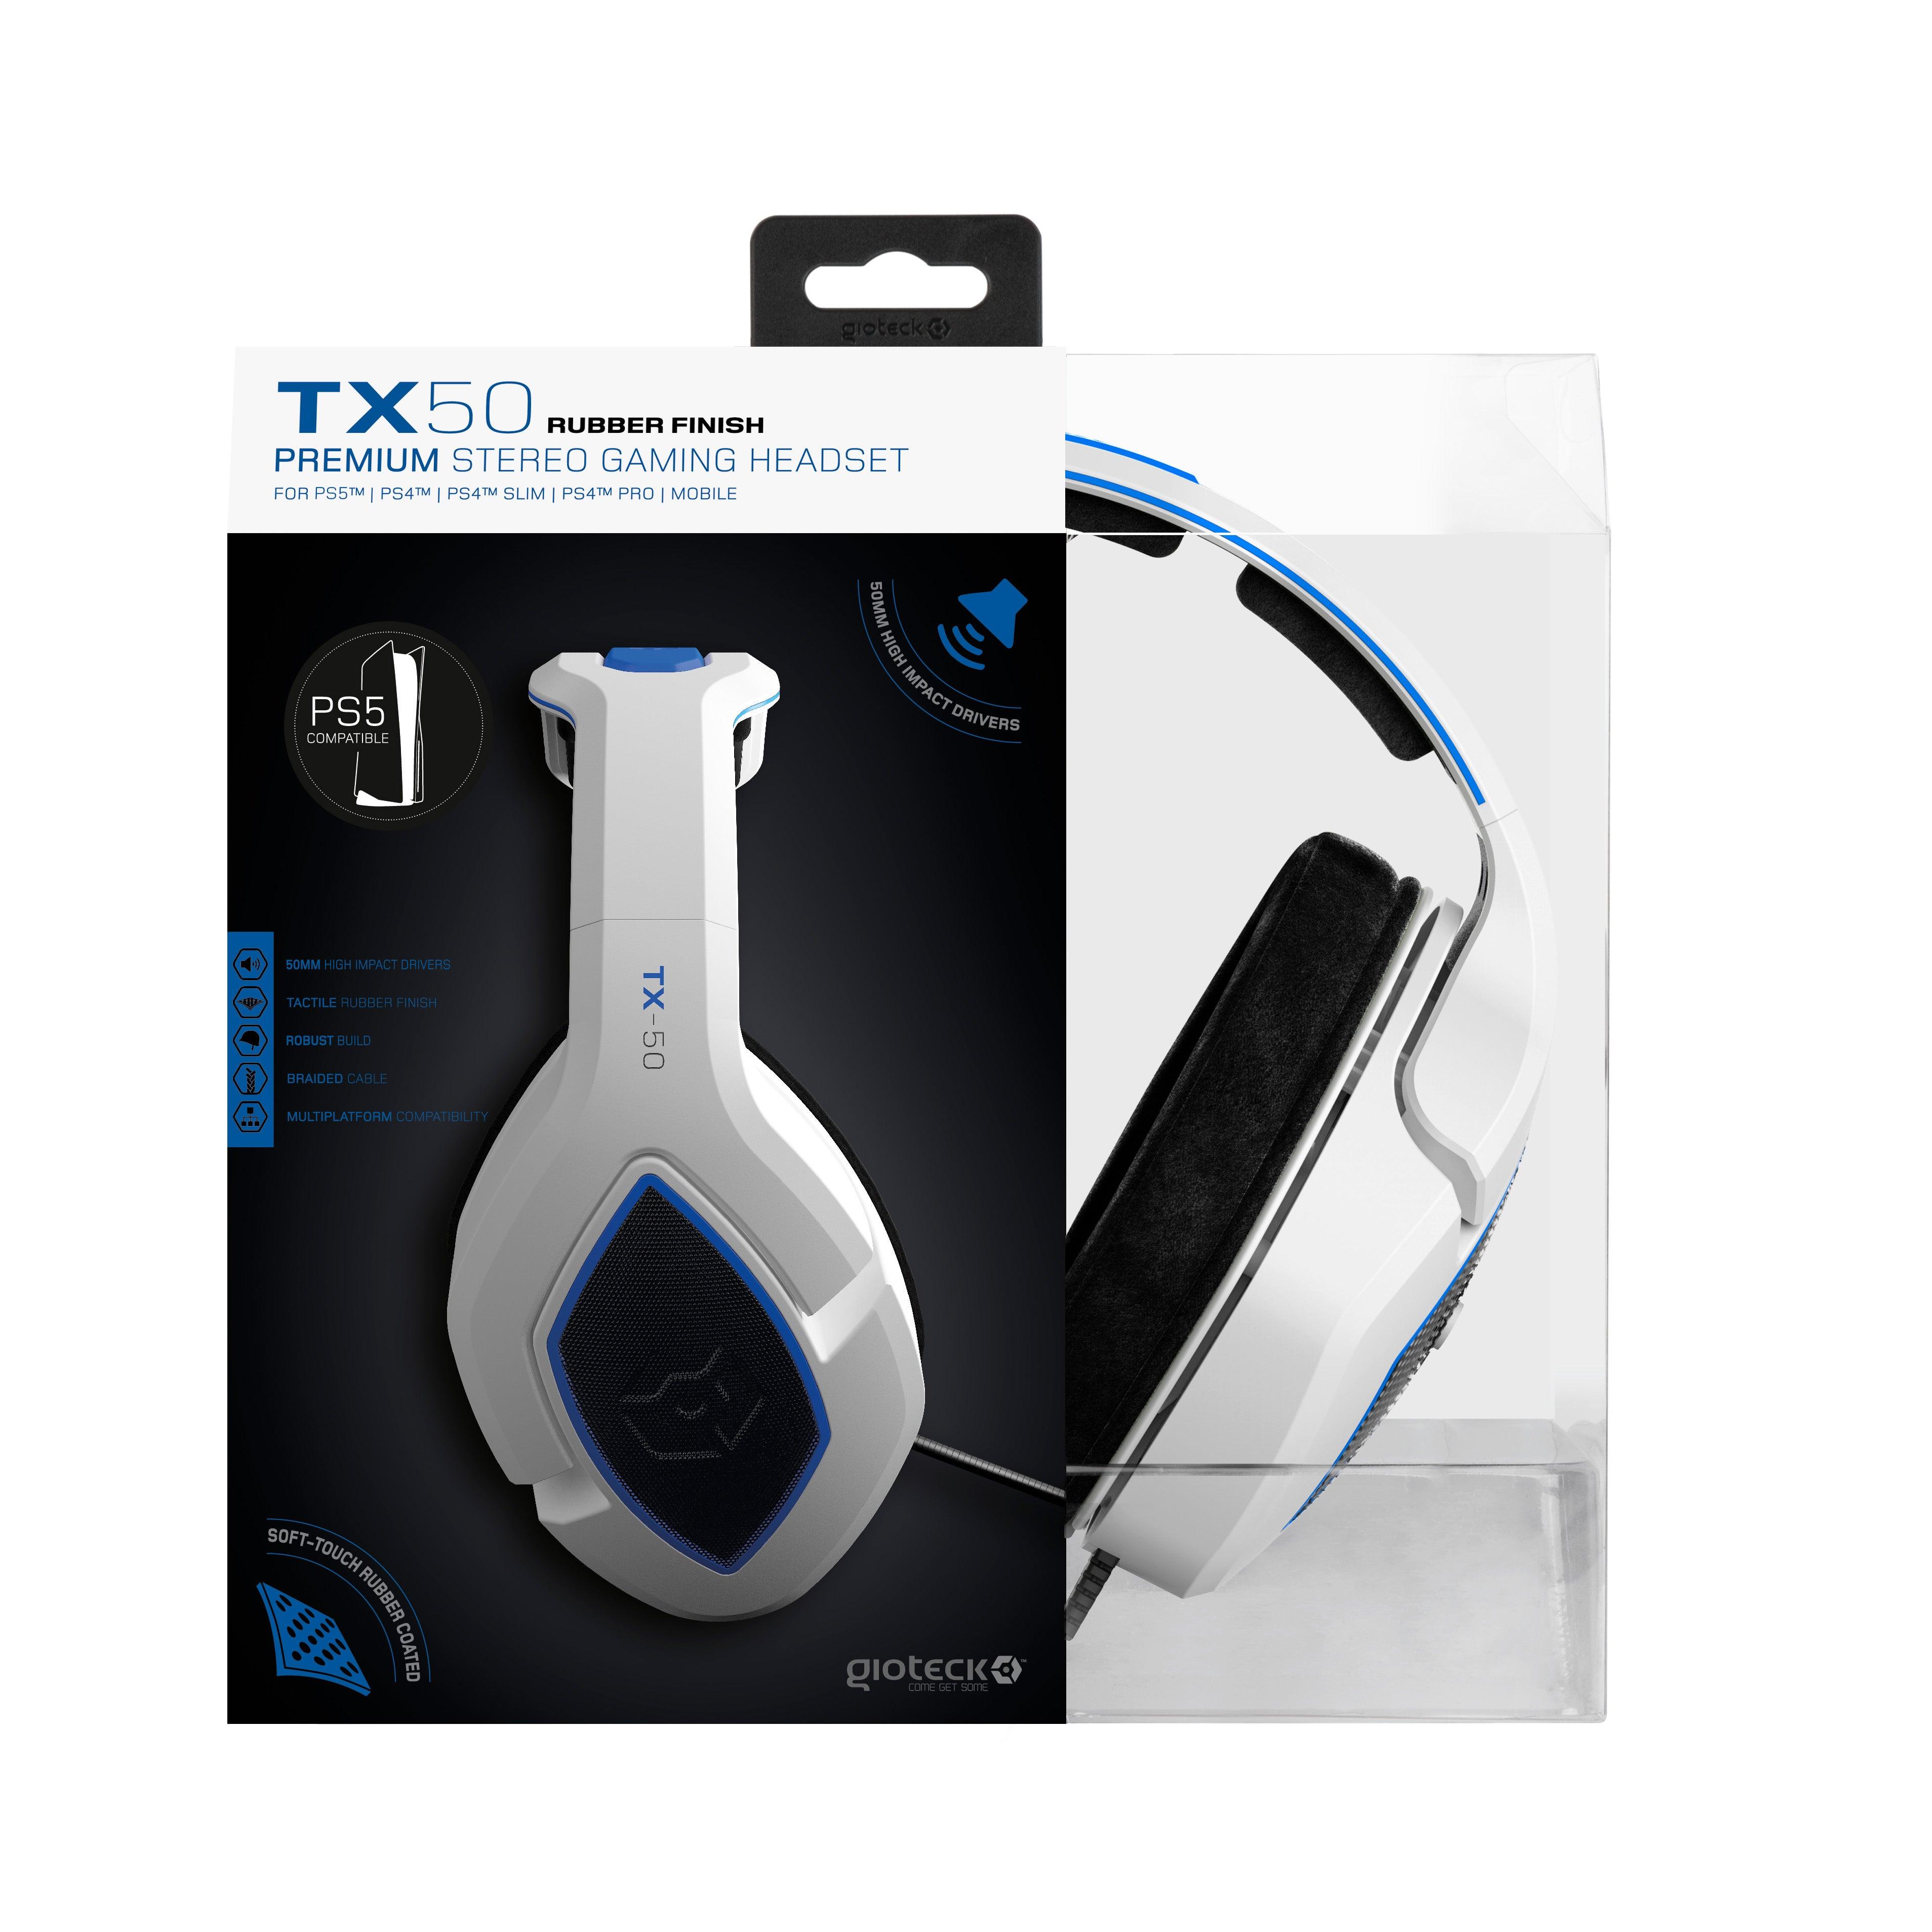 Tx 50 White - Want a New Gadget